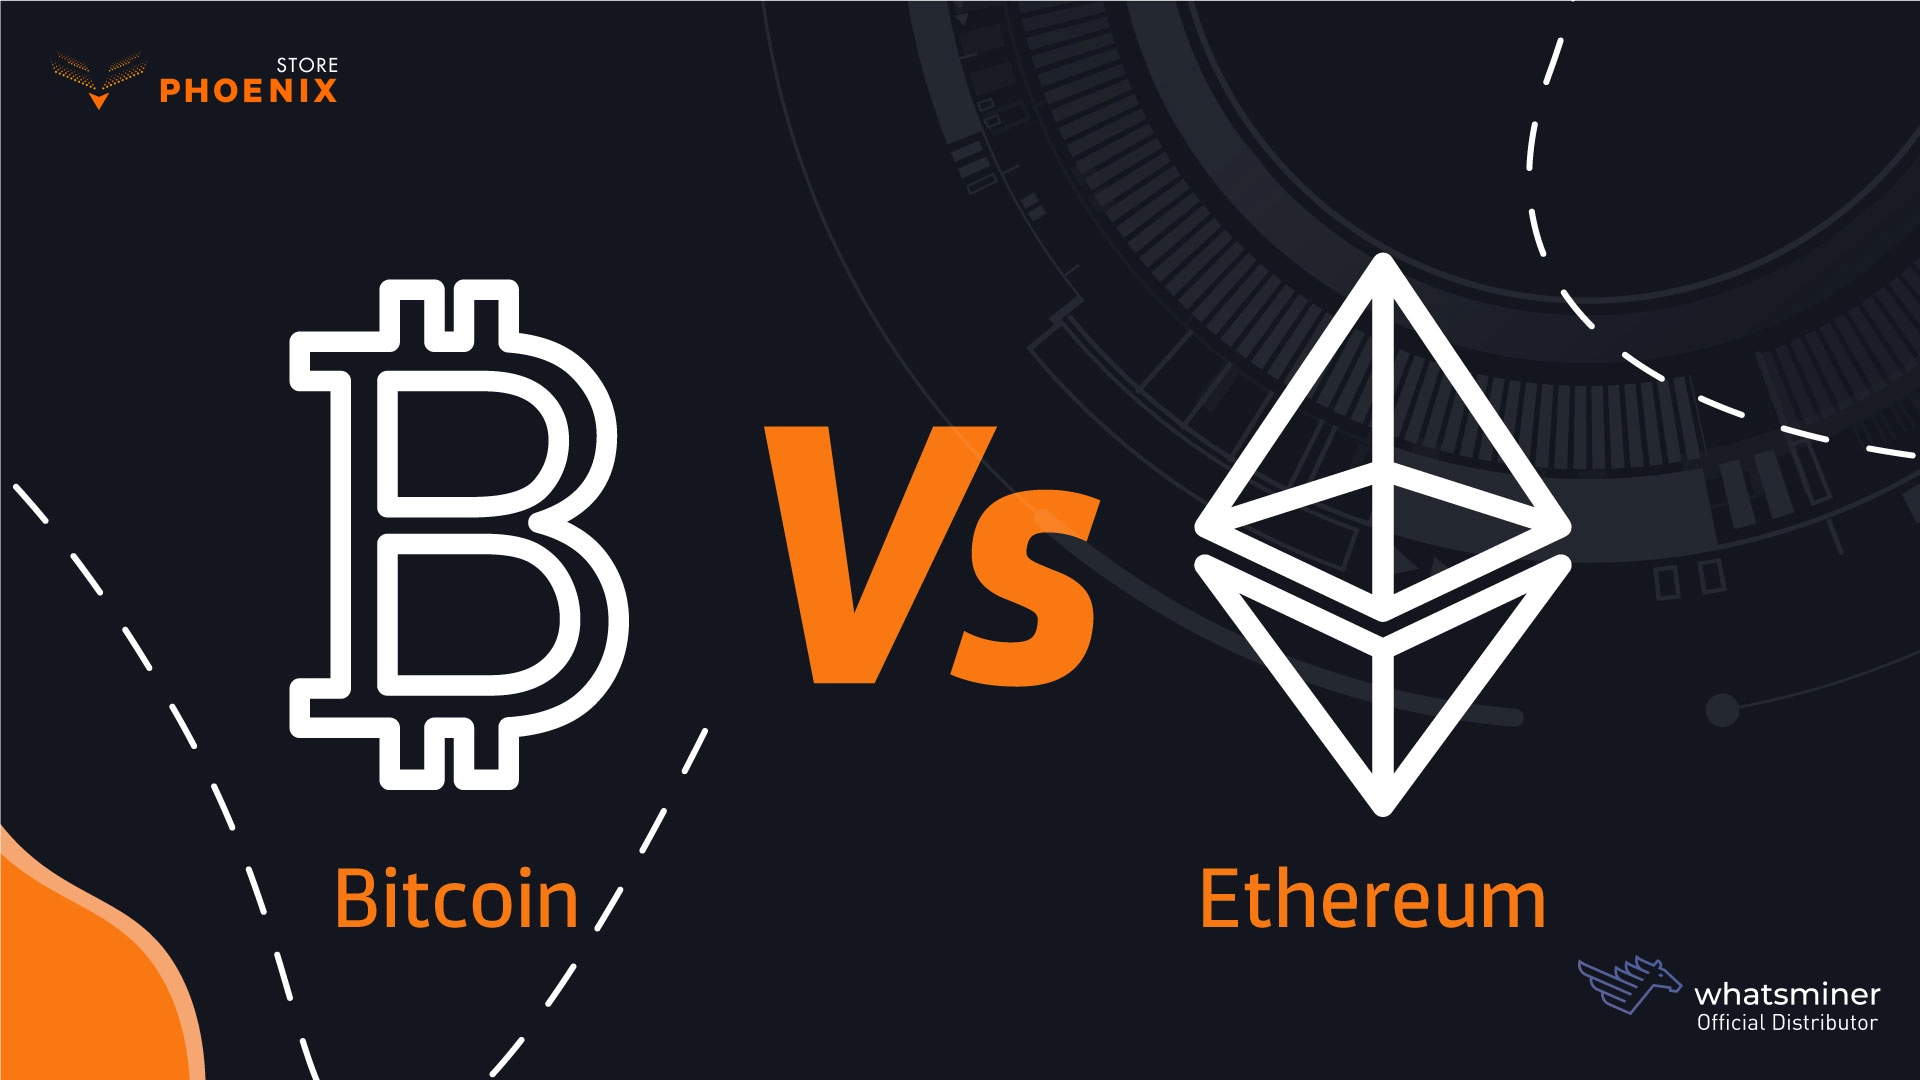 Bitcoin VS Ethereum Mining, Which One Is More Profitable In 2021?